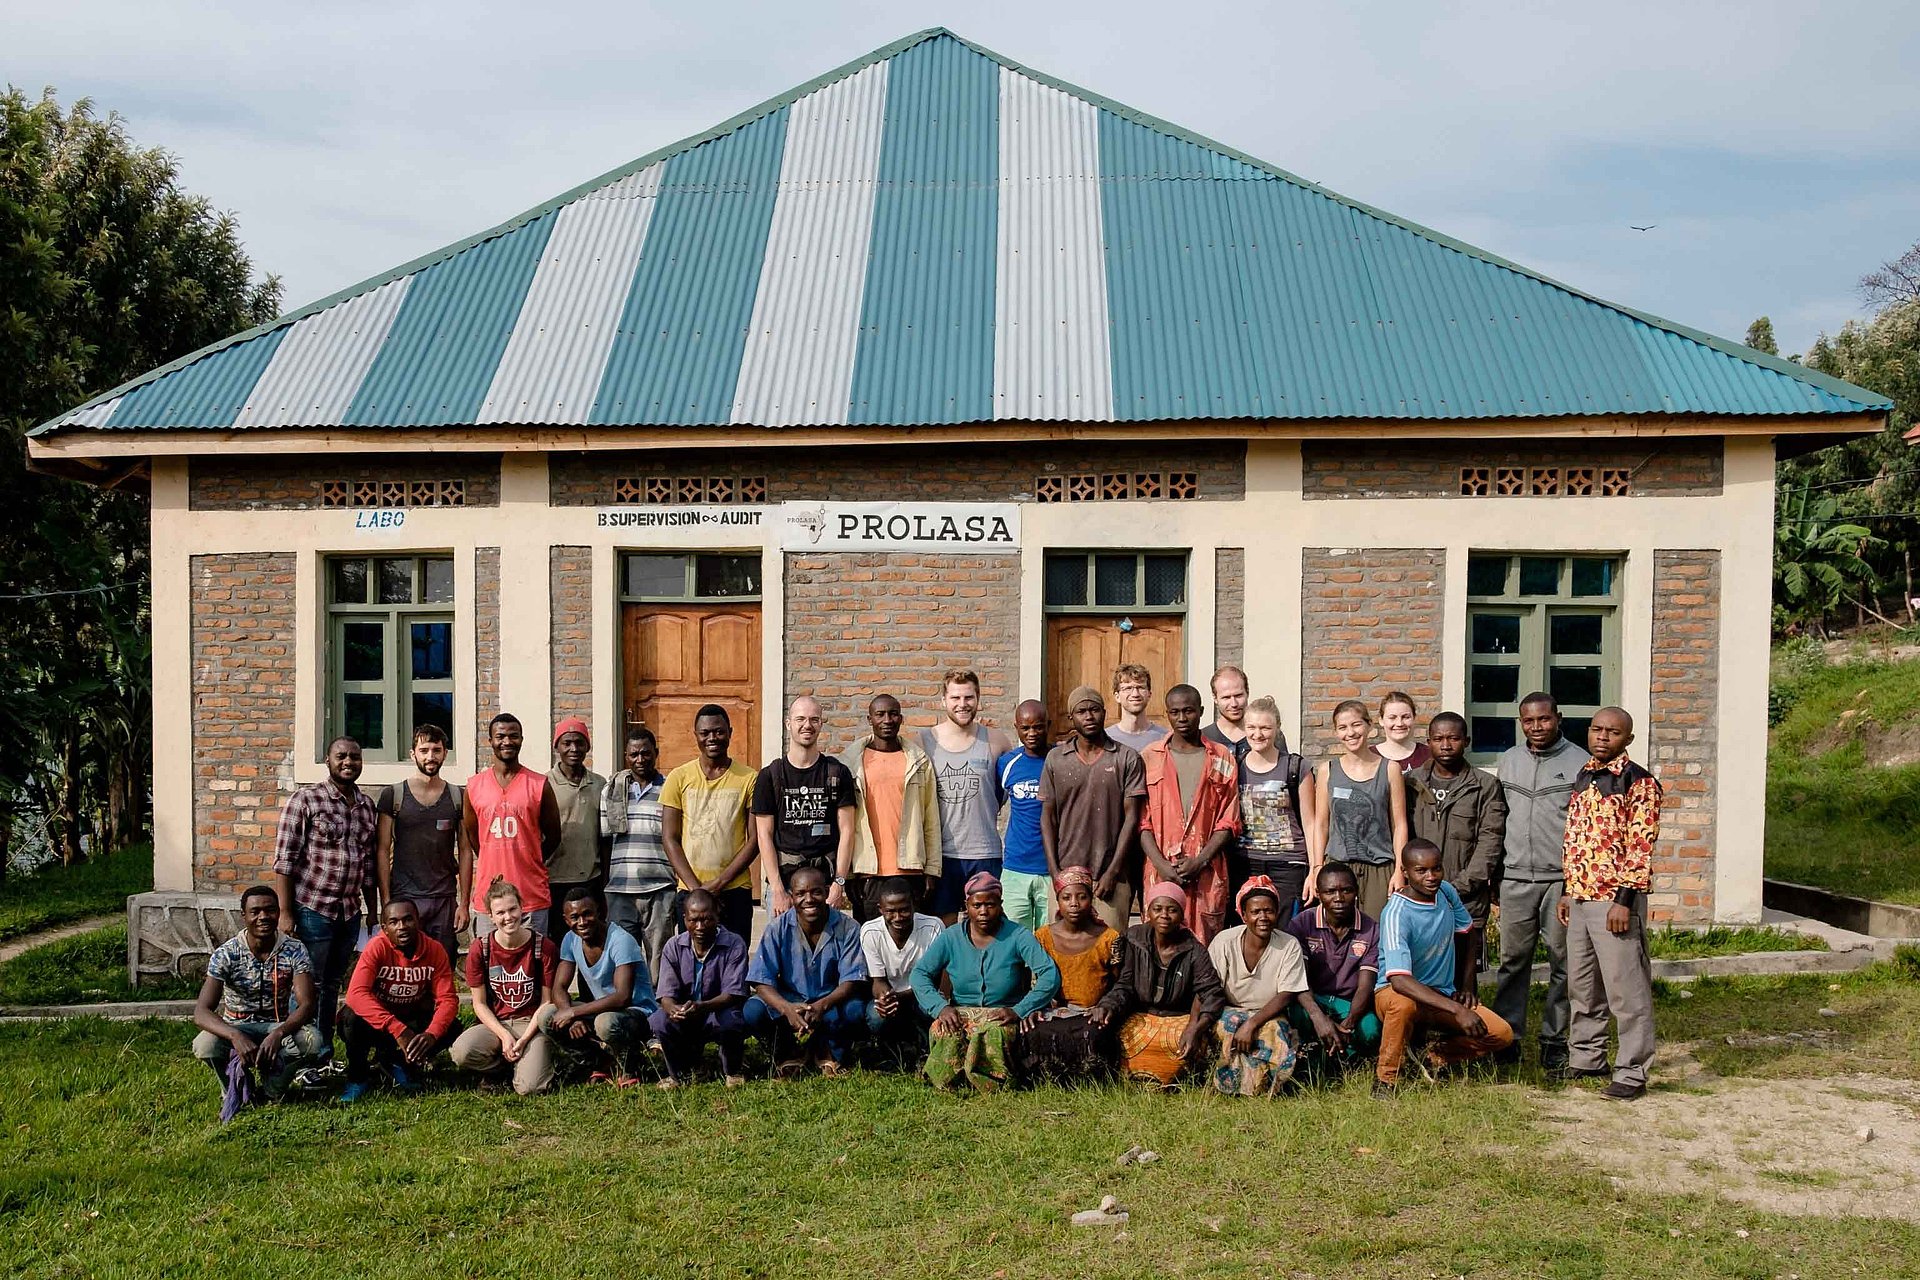 Group photo of the participants of the project in Beaumont by EWB